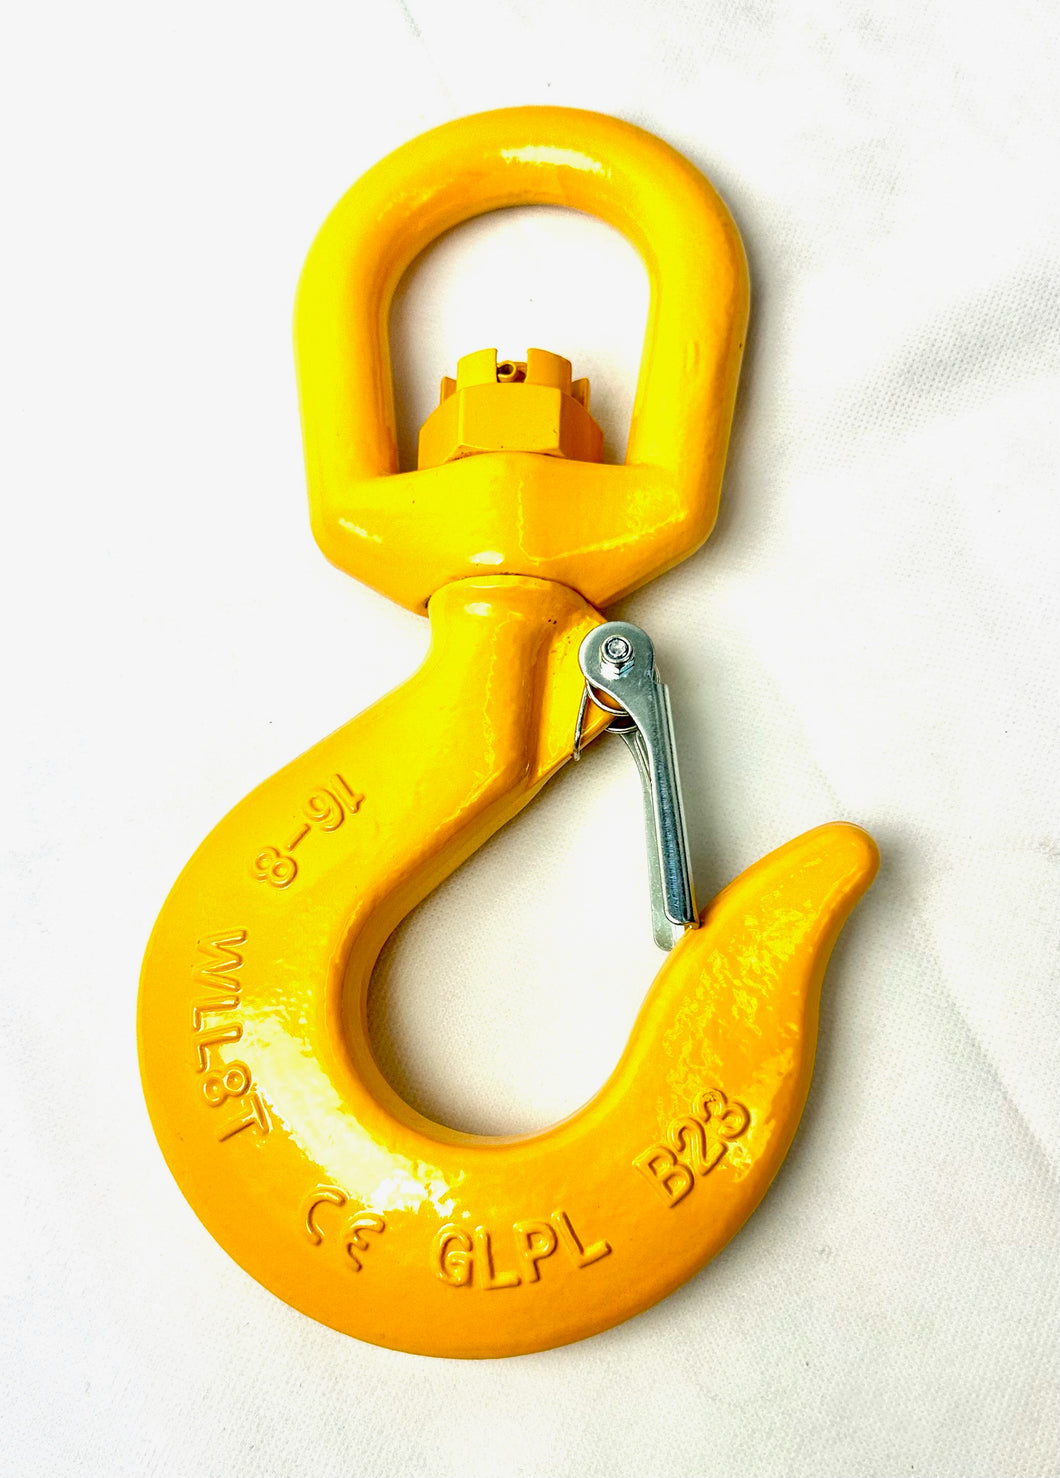 Grade 80 Swivel Hook with Latch Features:   Size: 16mm WLL: 8TON, Breaking load: 32TON (4 times of WLL) Grade: 80 (T8) Test certificate supplied upon request AS3776 Compliant Marked: Size/Grade/Manufacturer Code/Tracking code Size available:  6mm WLL 1.12ton 7/8mm WLL 2.0ton 10mm WLL 3.15ton 13mm WLL 5.3ton 16mm WLL 8ton